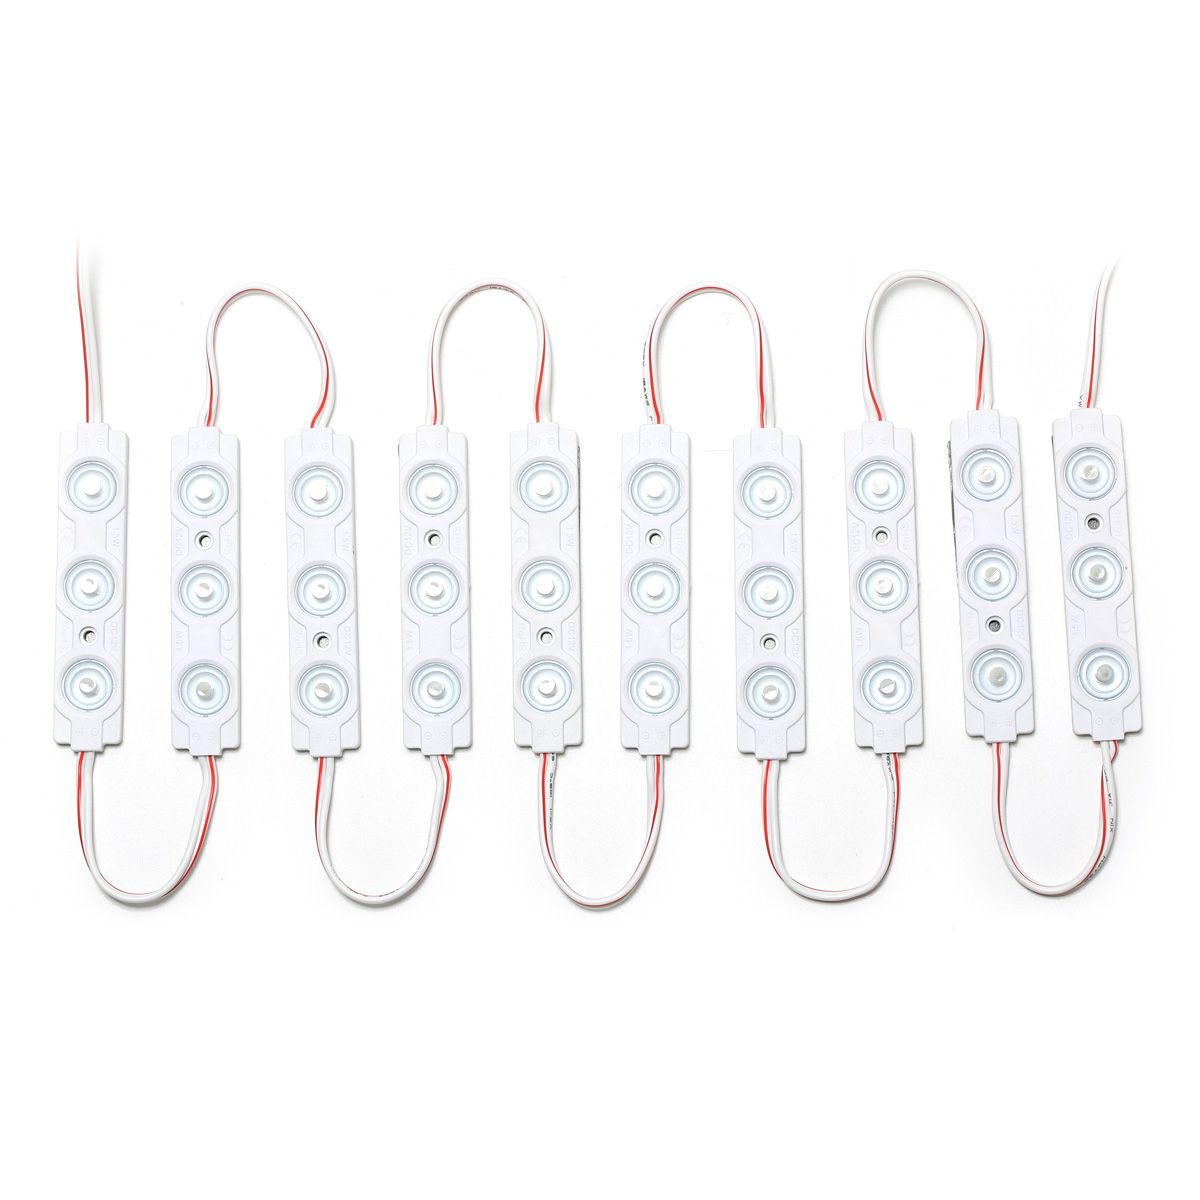 AMBOTHER-DC12V-LED-Module-Strip-Light-Waterproof-Reading-Car-Decorative-Lamp--5M-Cable-Line-1678729